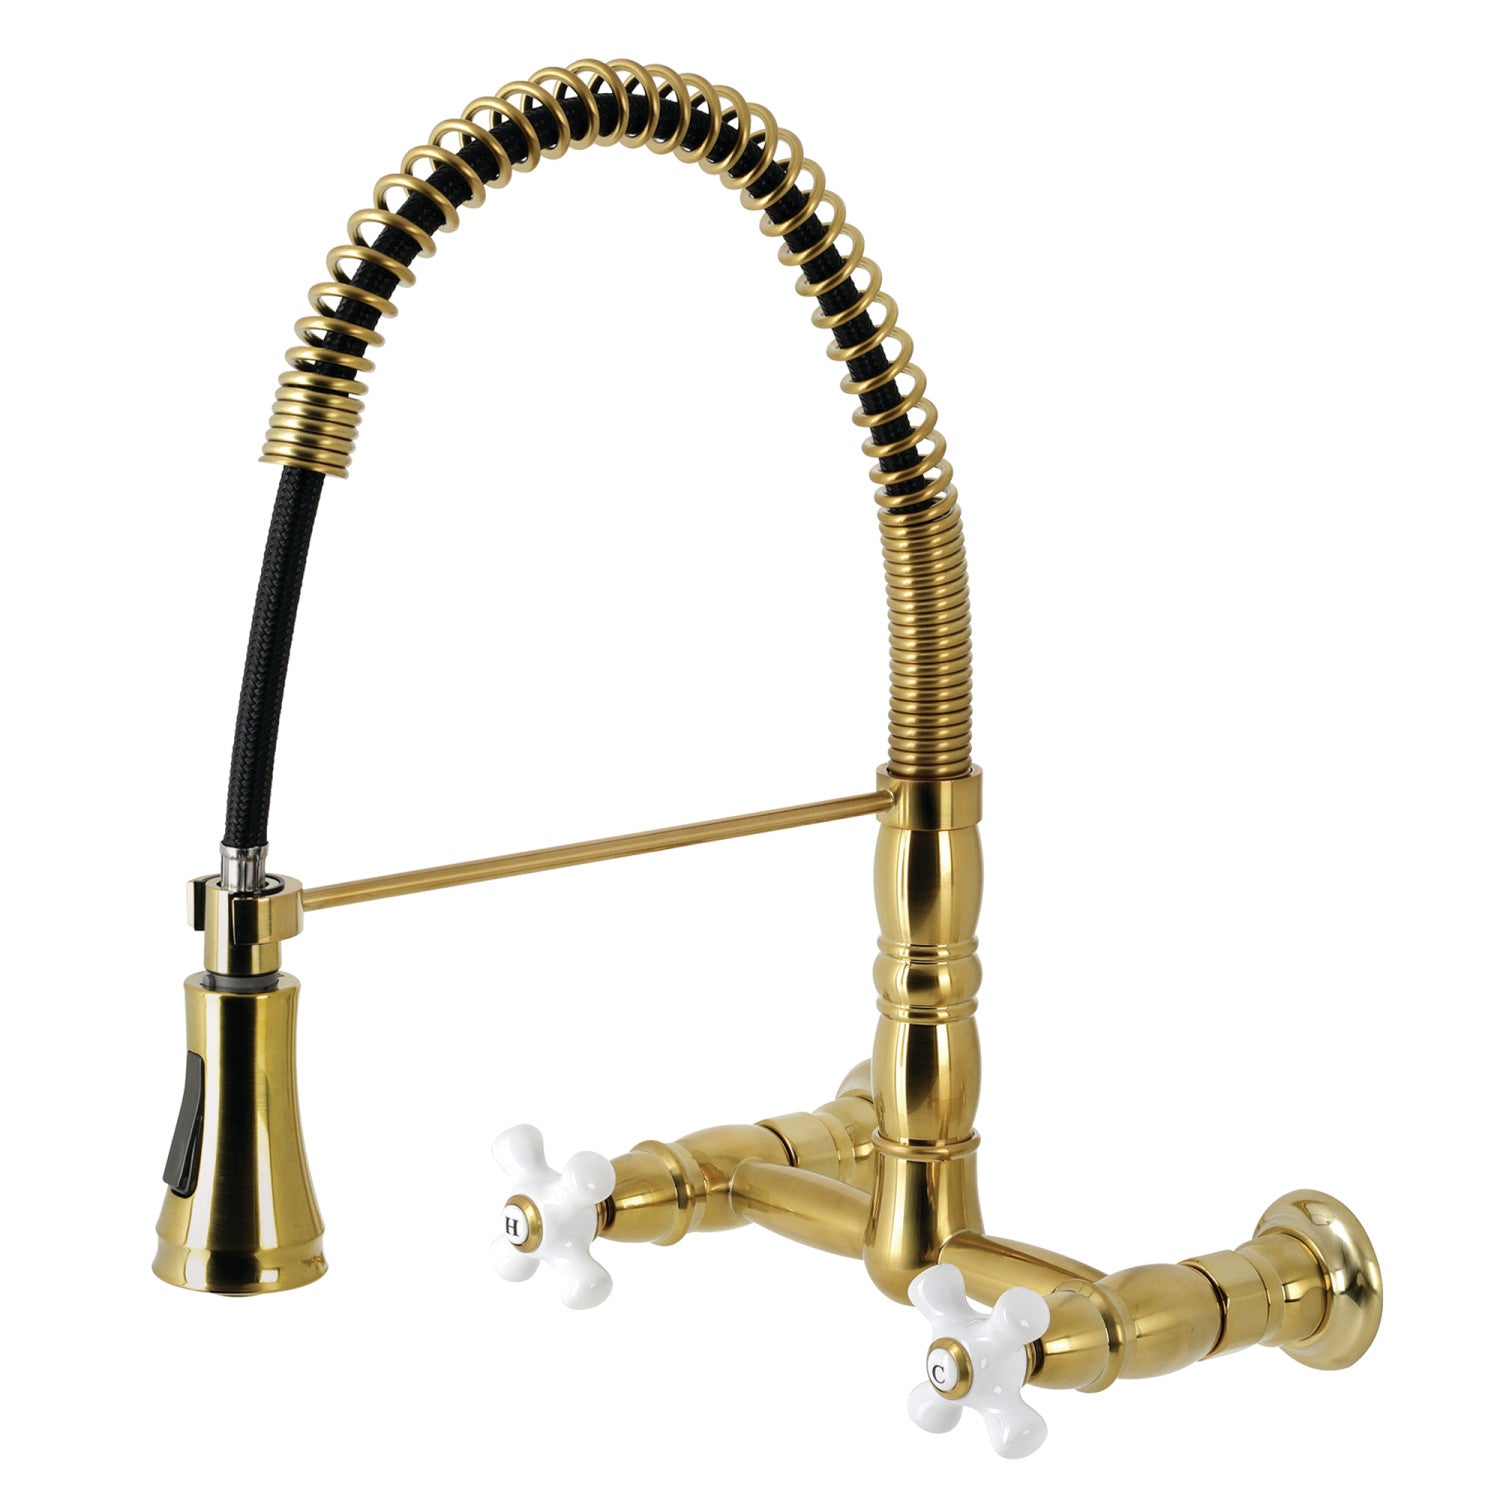 Kingston Brass KS1235TALBS Mono Deck Mount Kitchen Faucet with Brass  Sprayer and 9/16 in Spout Reach, Oil Rubbed Bronze by Kingston Brass  キッチン